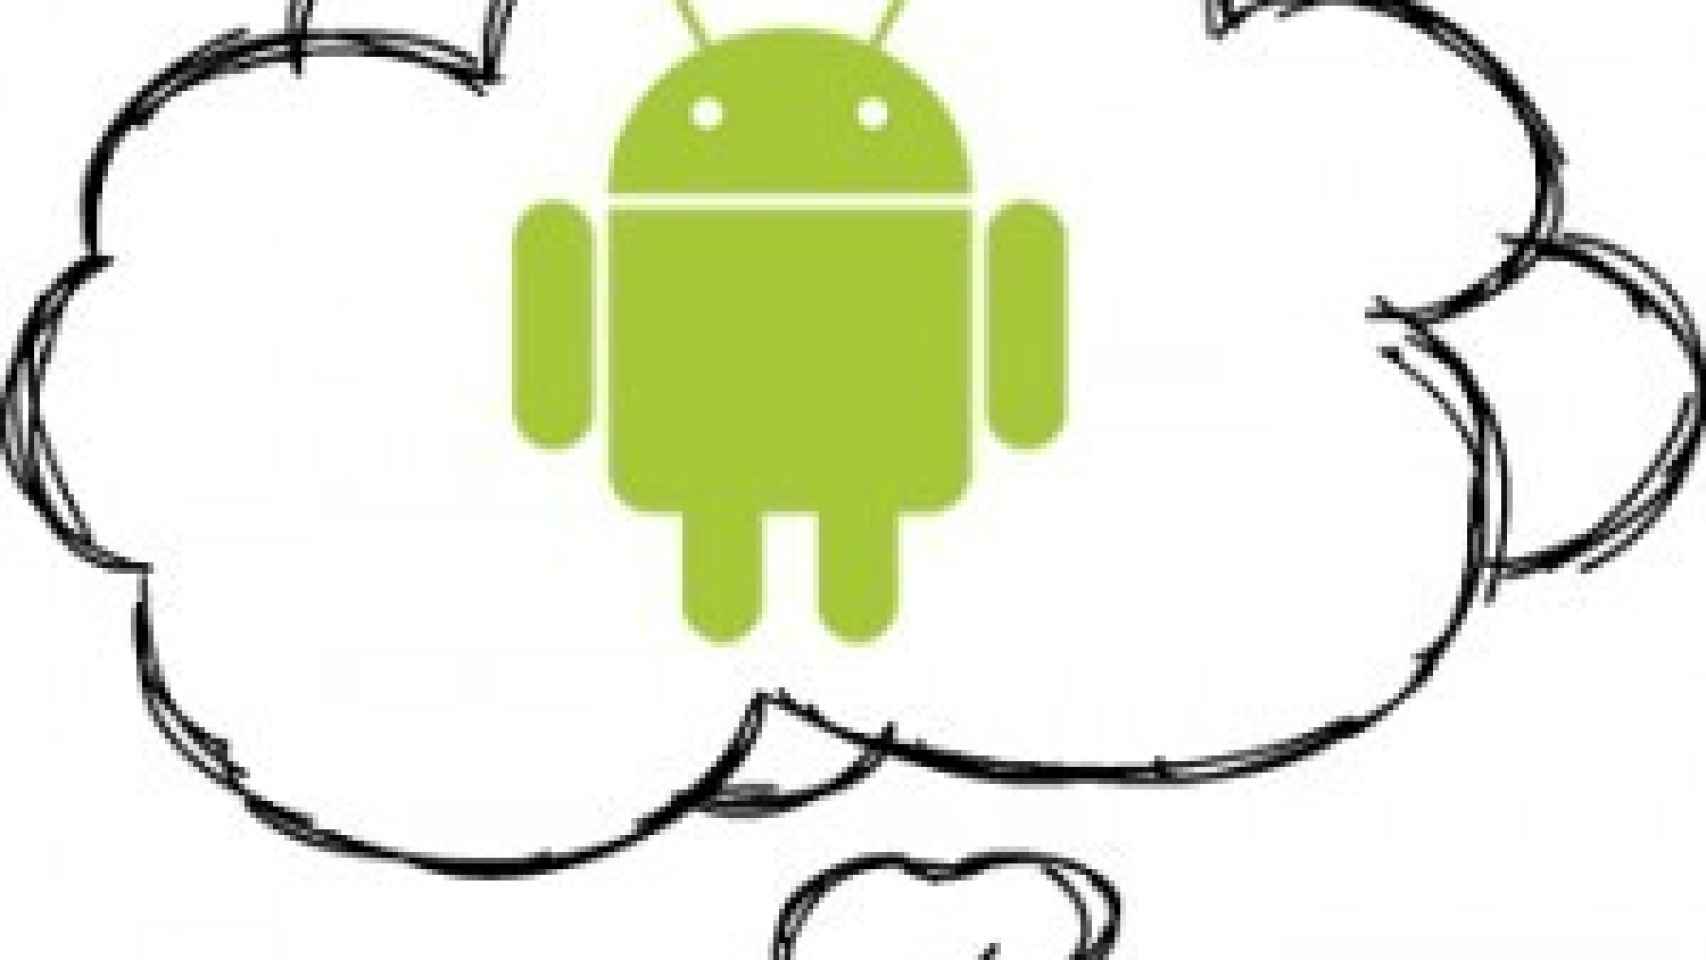 A tal necesidad, tal Android